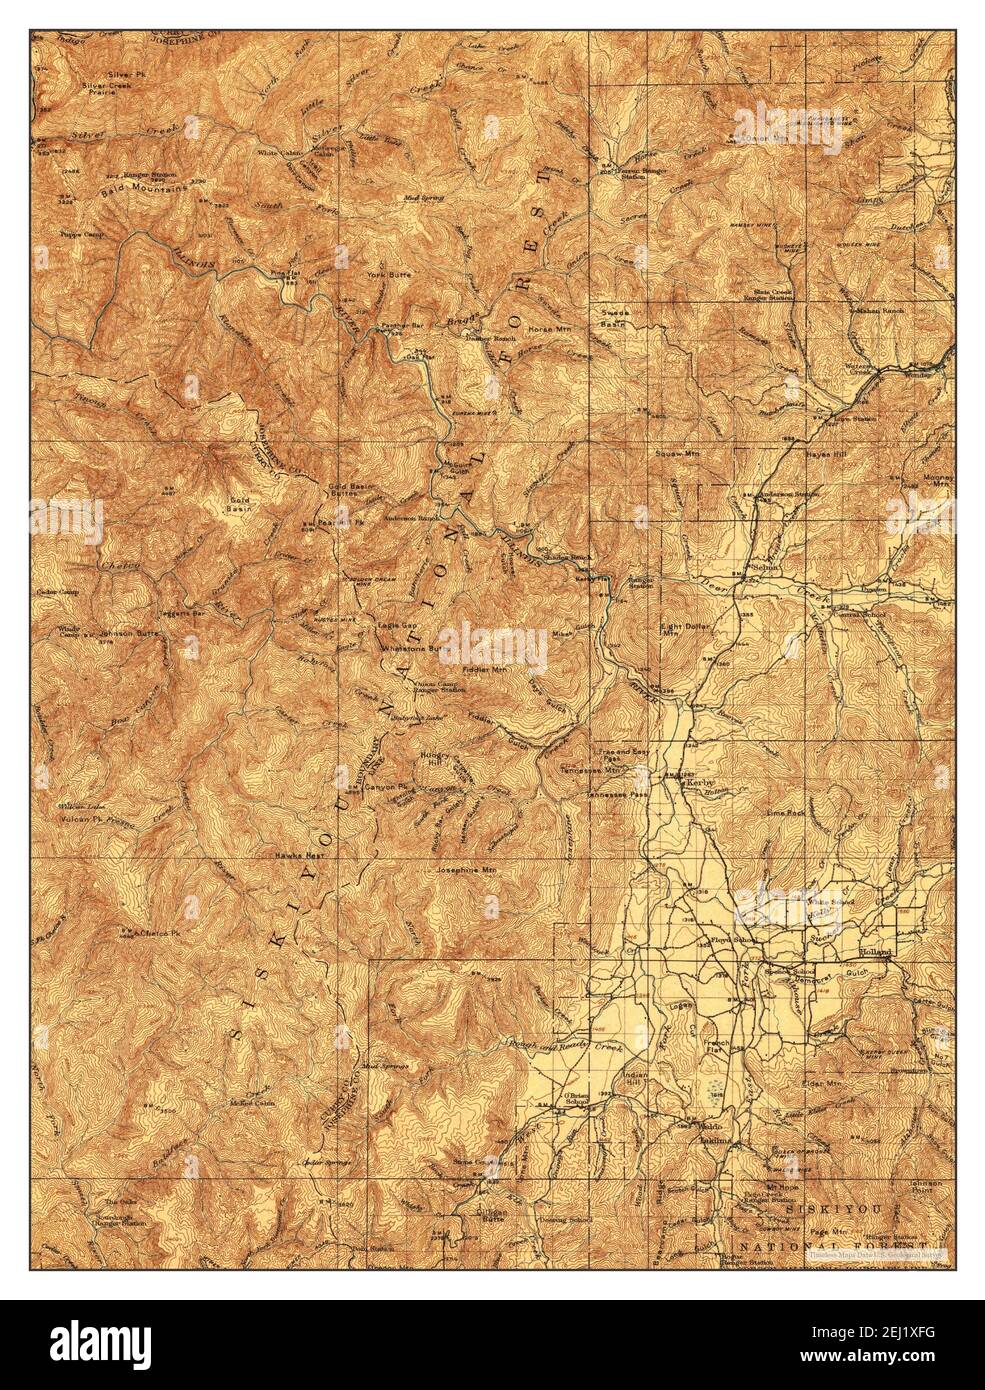 Kerby, Oregon, map 1918, 1:125000, United States of America by Timeless Maps, data U.S. Geological Survey Stock Photo